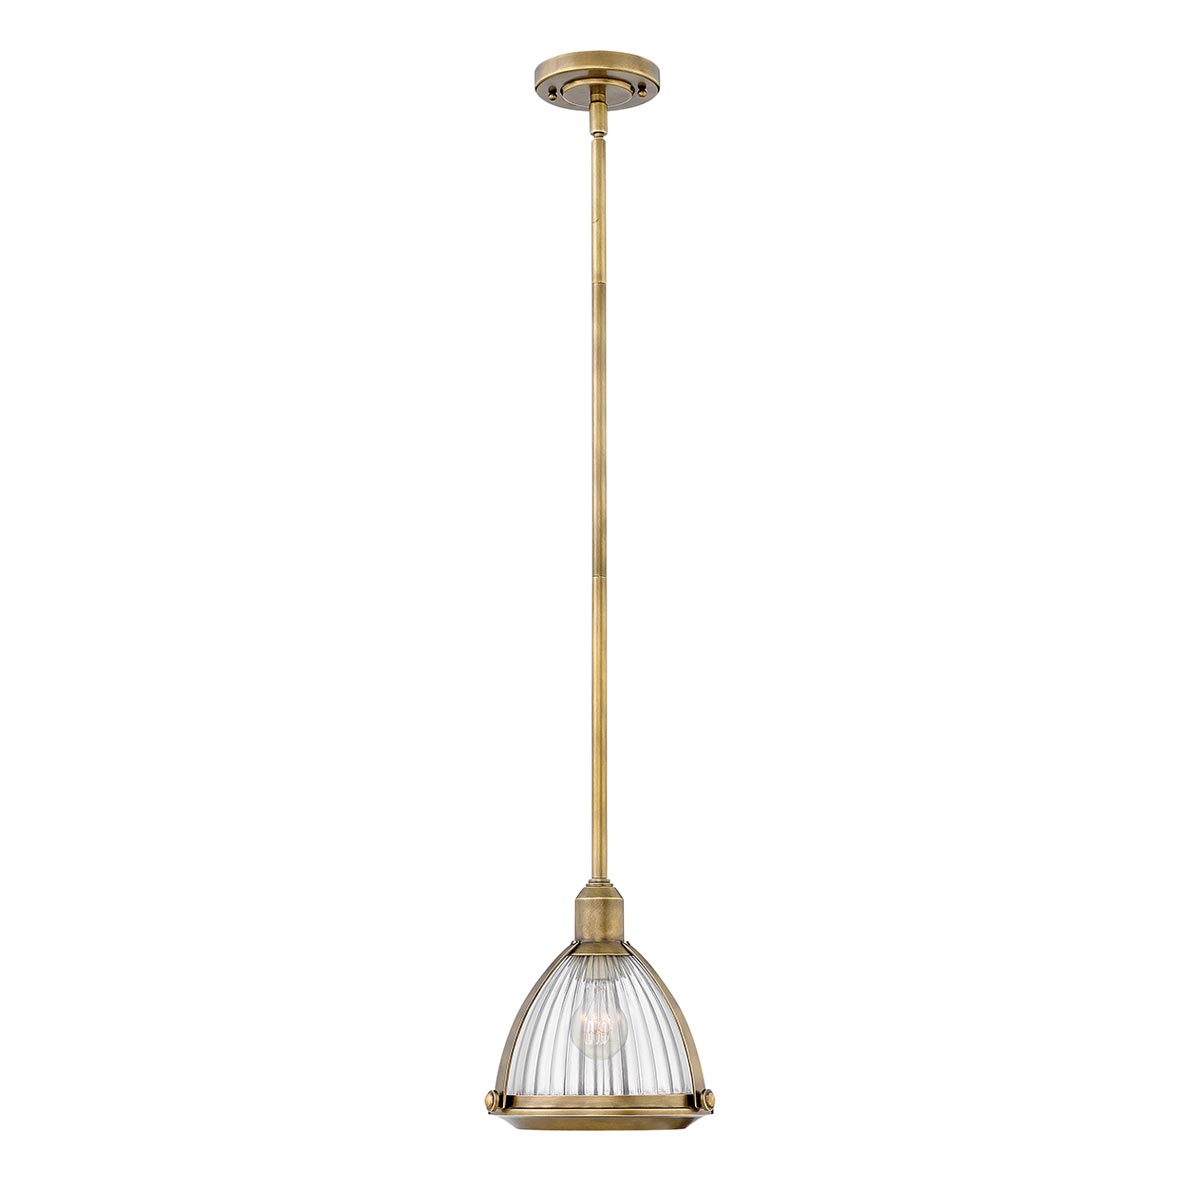 Elroy Heritage Brass 1 Lamp Pendant Ceiling Light Ribbed Glass Shade